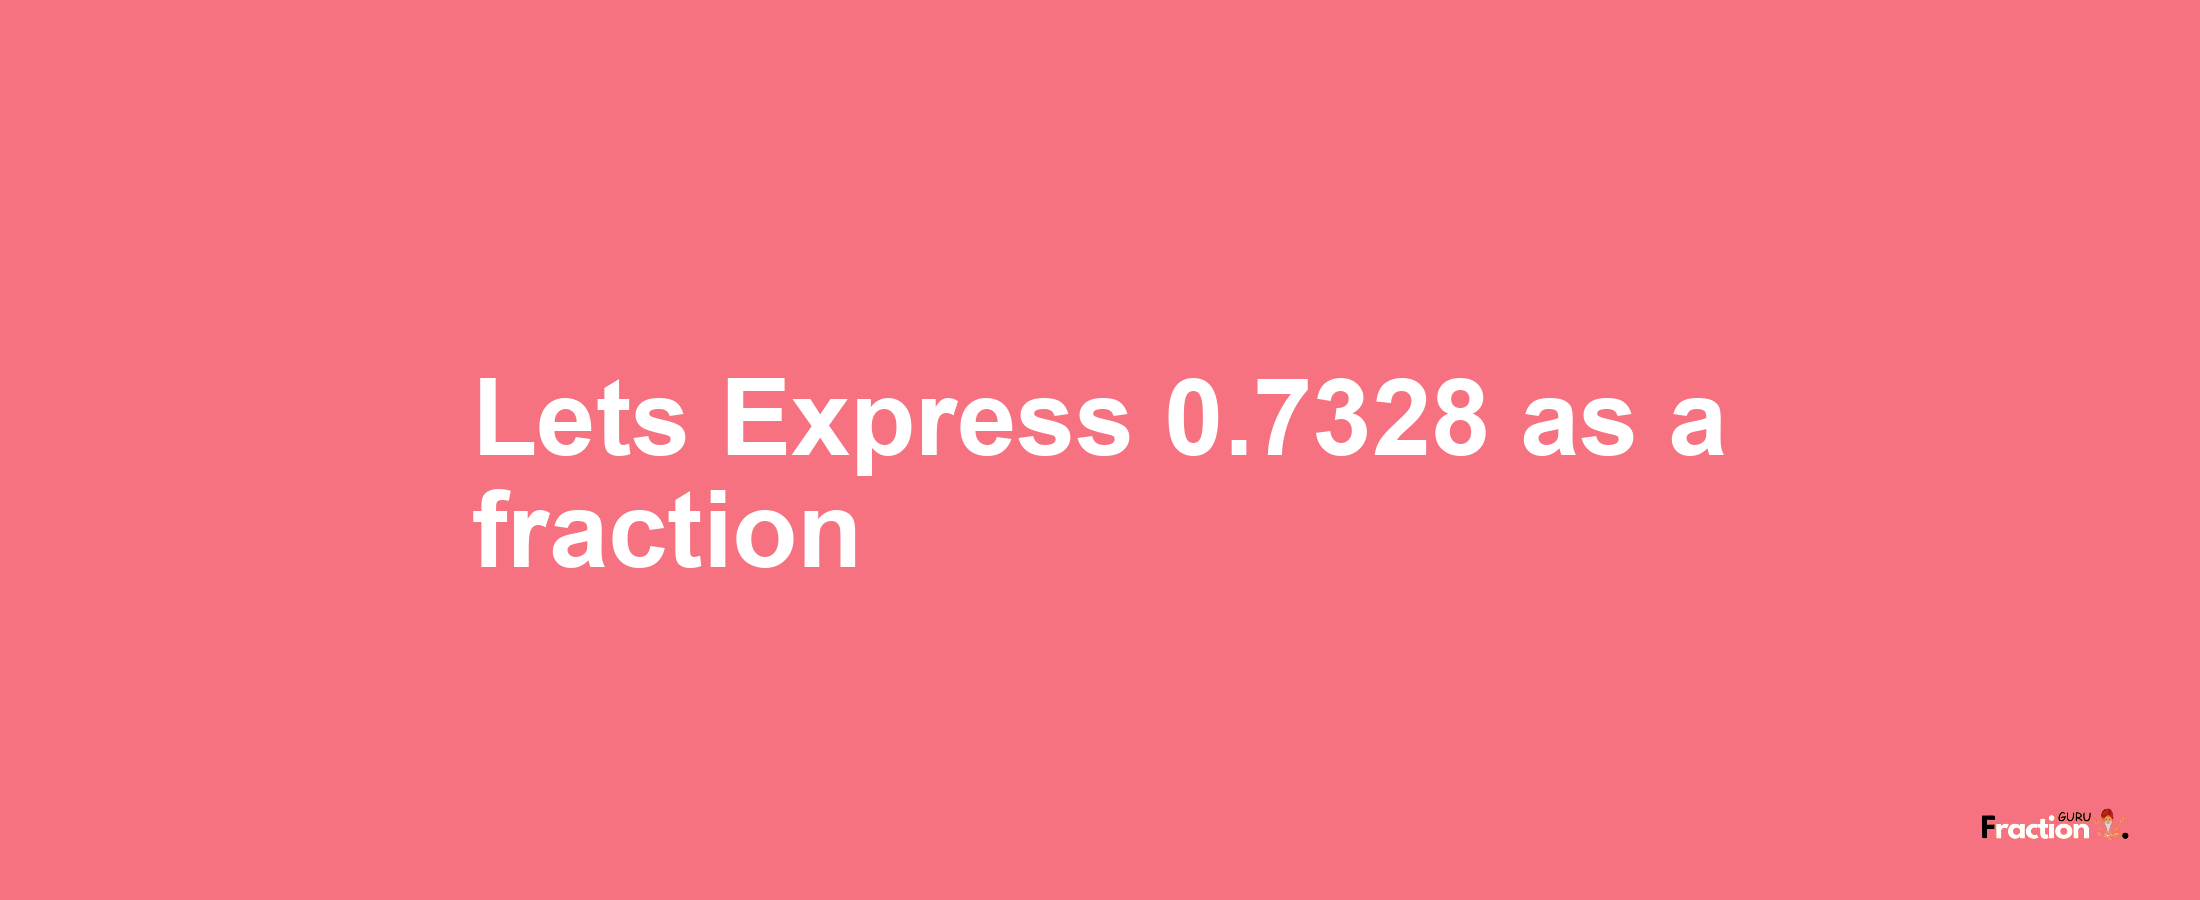 Lets Express 0.7328 as afraction